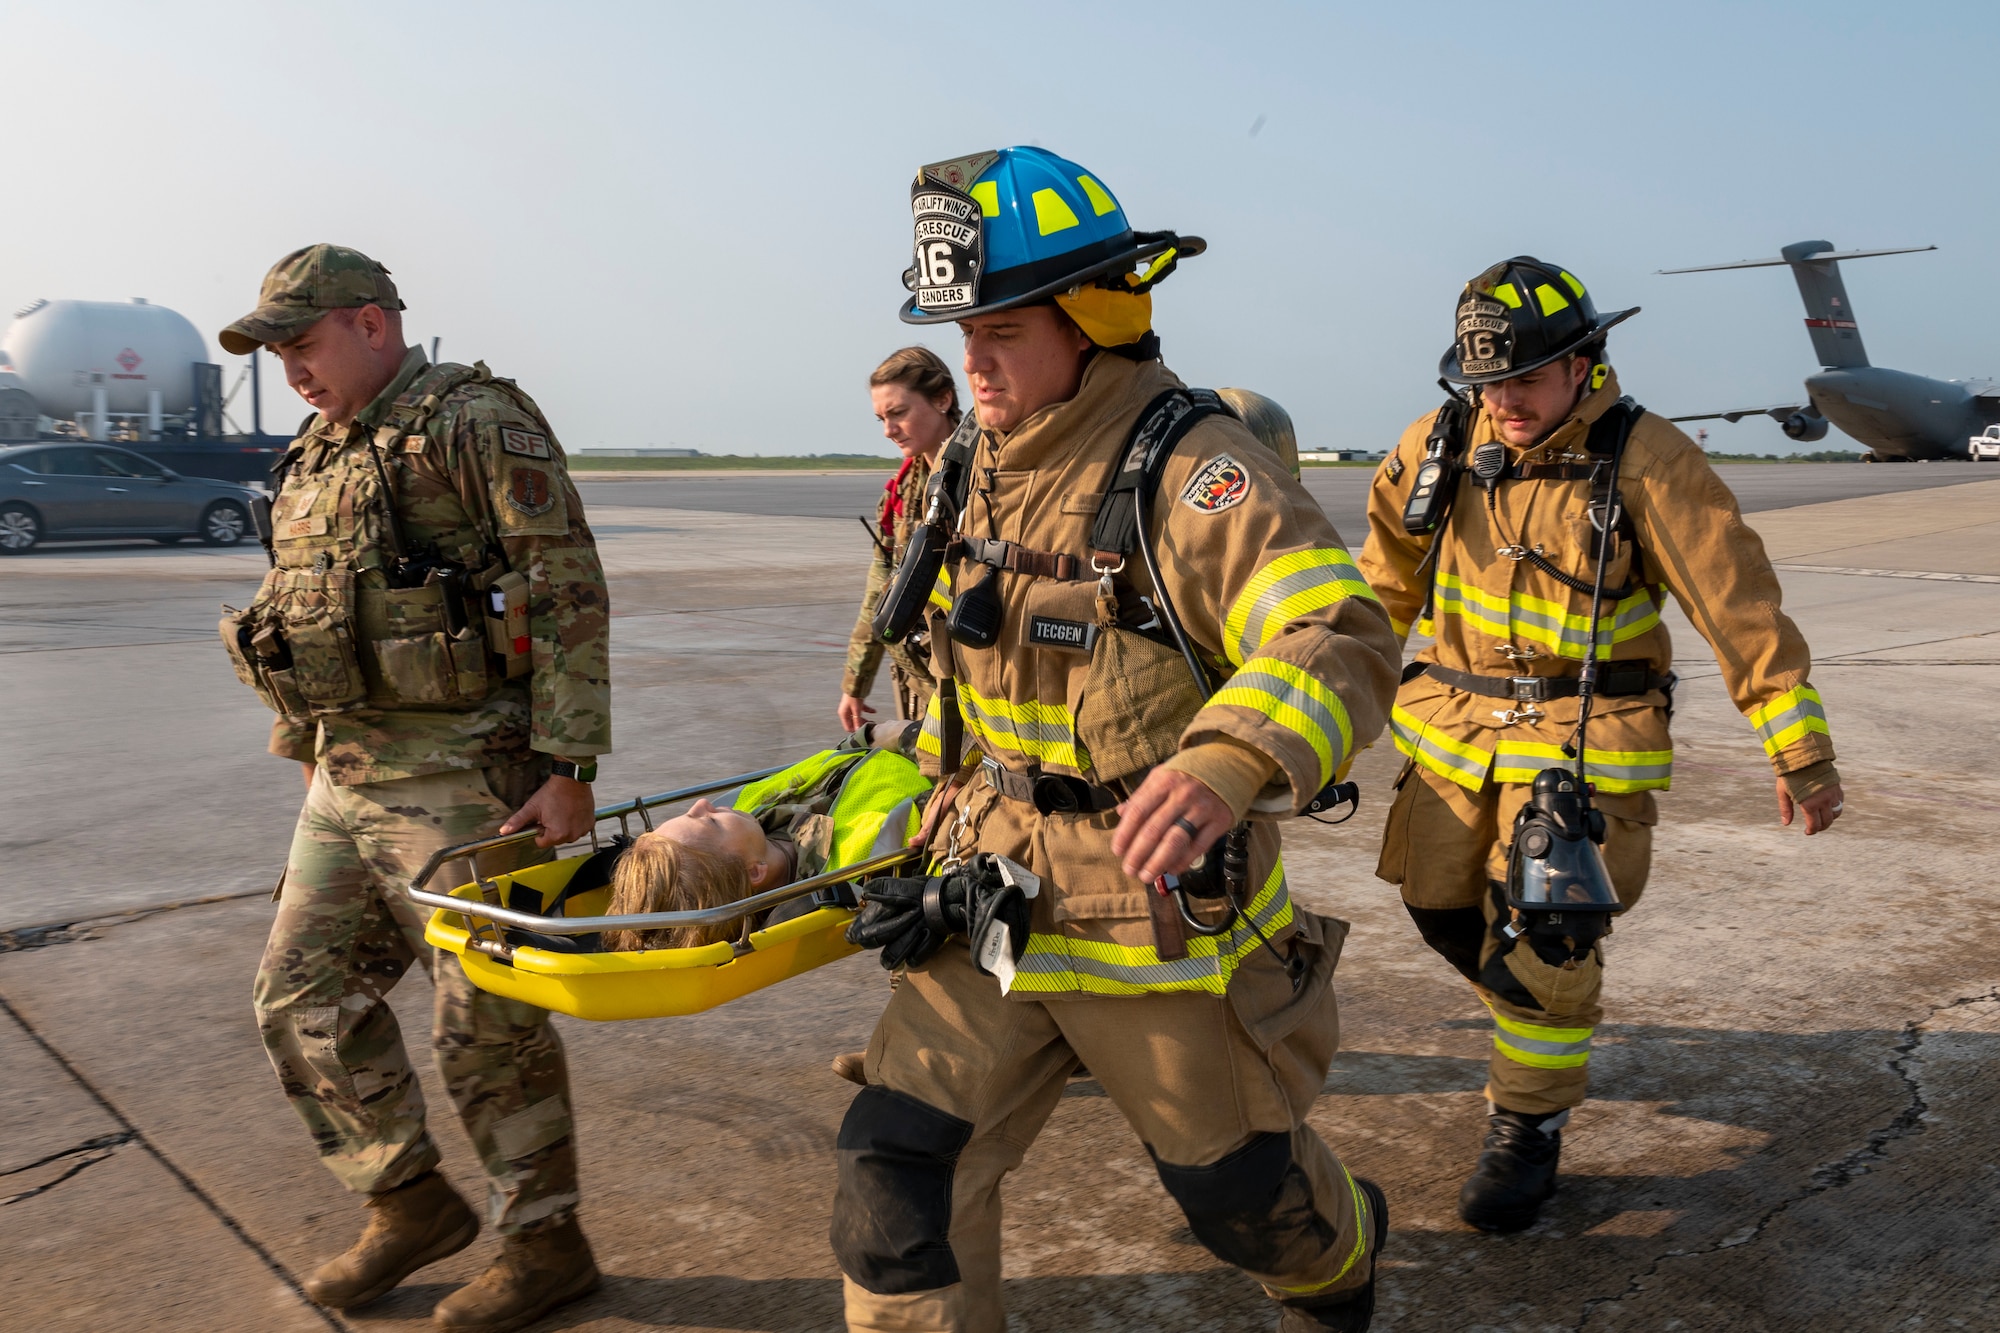 U.S. Air Force Staff Sgt. Geoffrey Harris and Staff Sgt. Kayla Sine, 167th Security Forces Squadron, and Staff Sgt. Timothy Sanders and Staff Sgt Cory Roberts, 167th Civil Engineering Squadron fire fighters, carry Senior Master Sgt. Angela Layton who is simulating a victim of an aircraft mishap during an emergency response exercise at the 167th Airlift Wing, Shepherd Field, Martinsburg, West Virginia, Sept. 16, 2022.